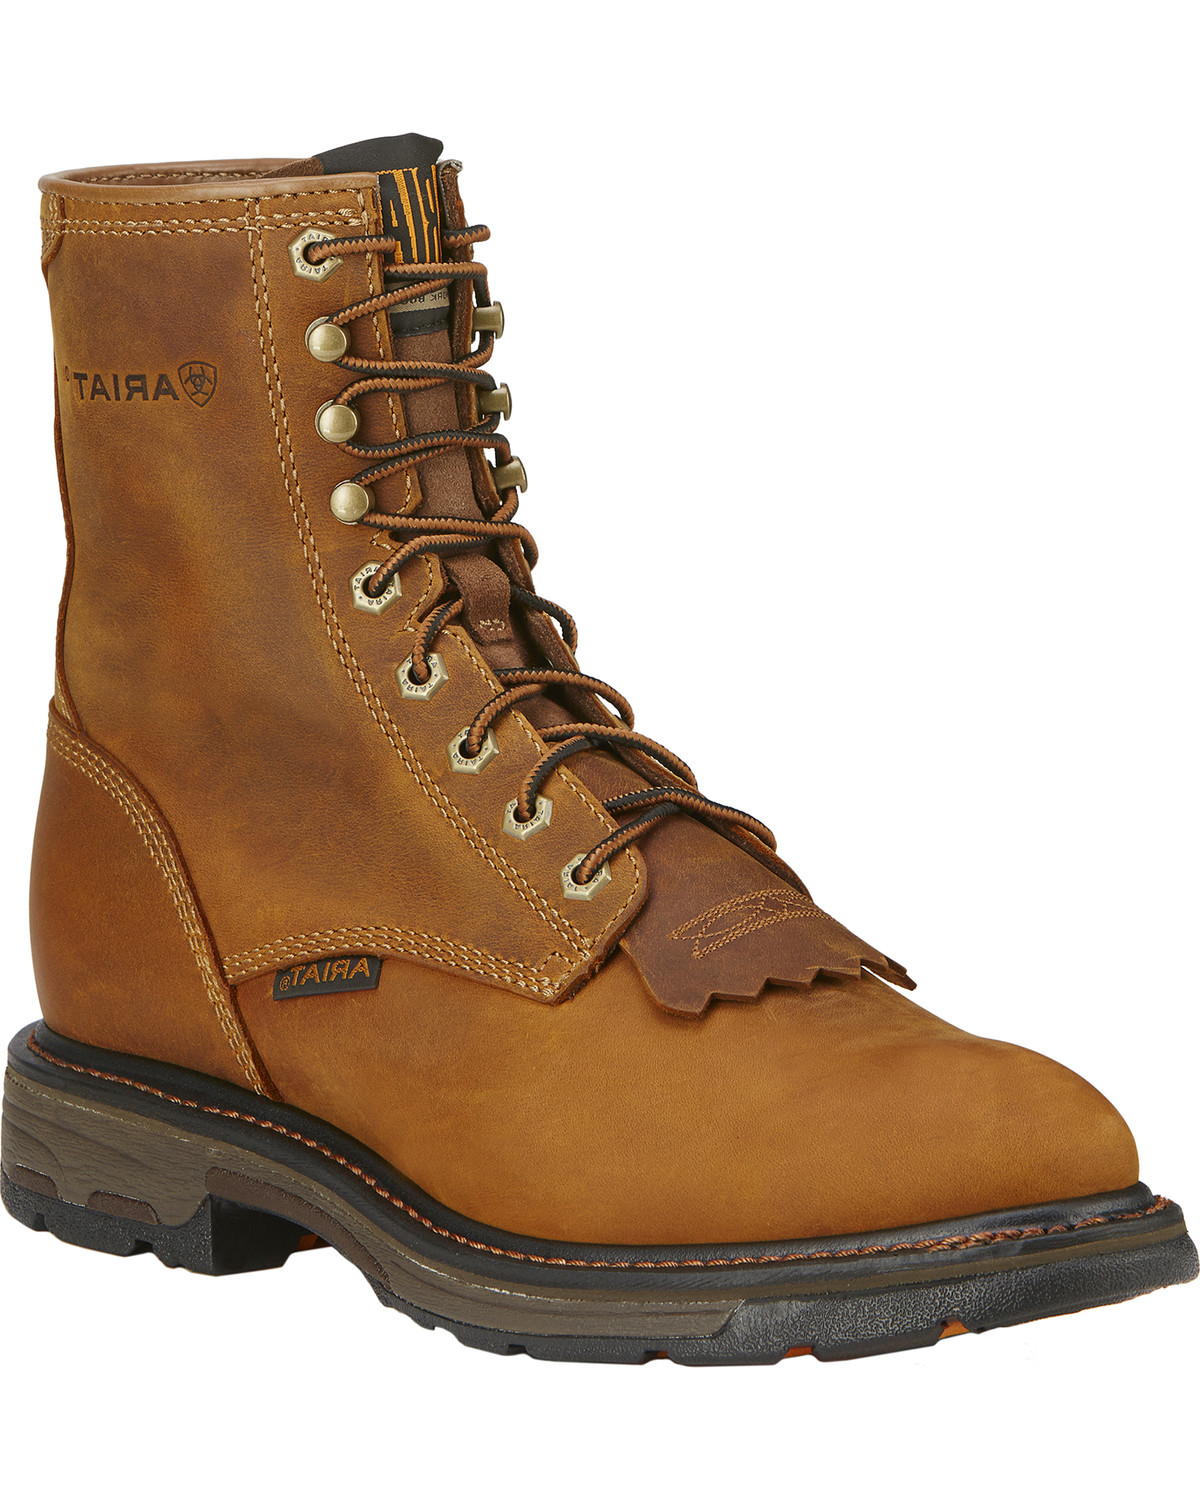 Ariat Men's WorkHog® 8" Lace-Up Work Boots